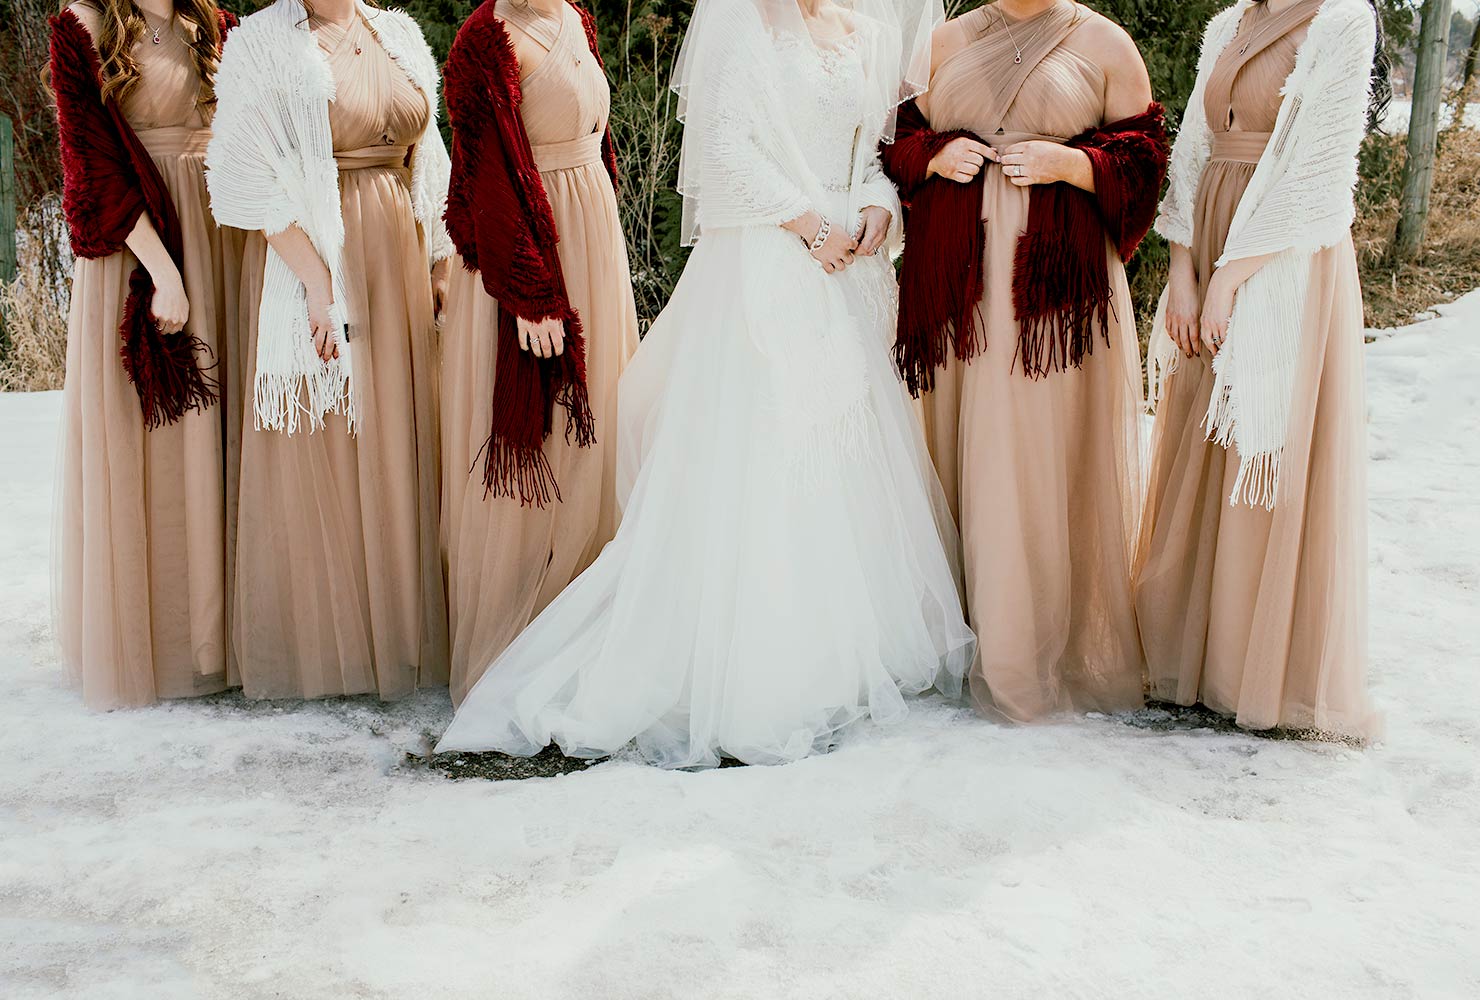 Bridal party with scarves.